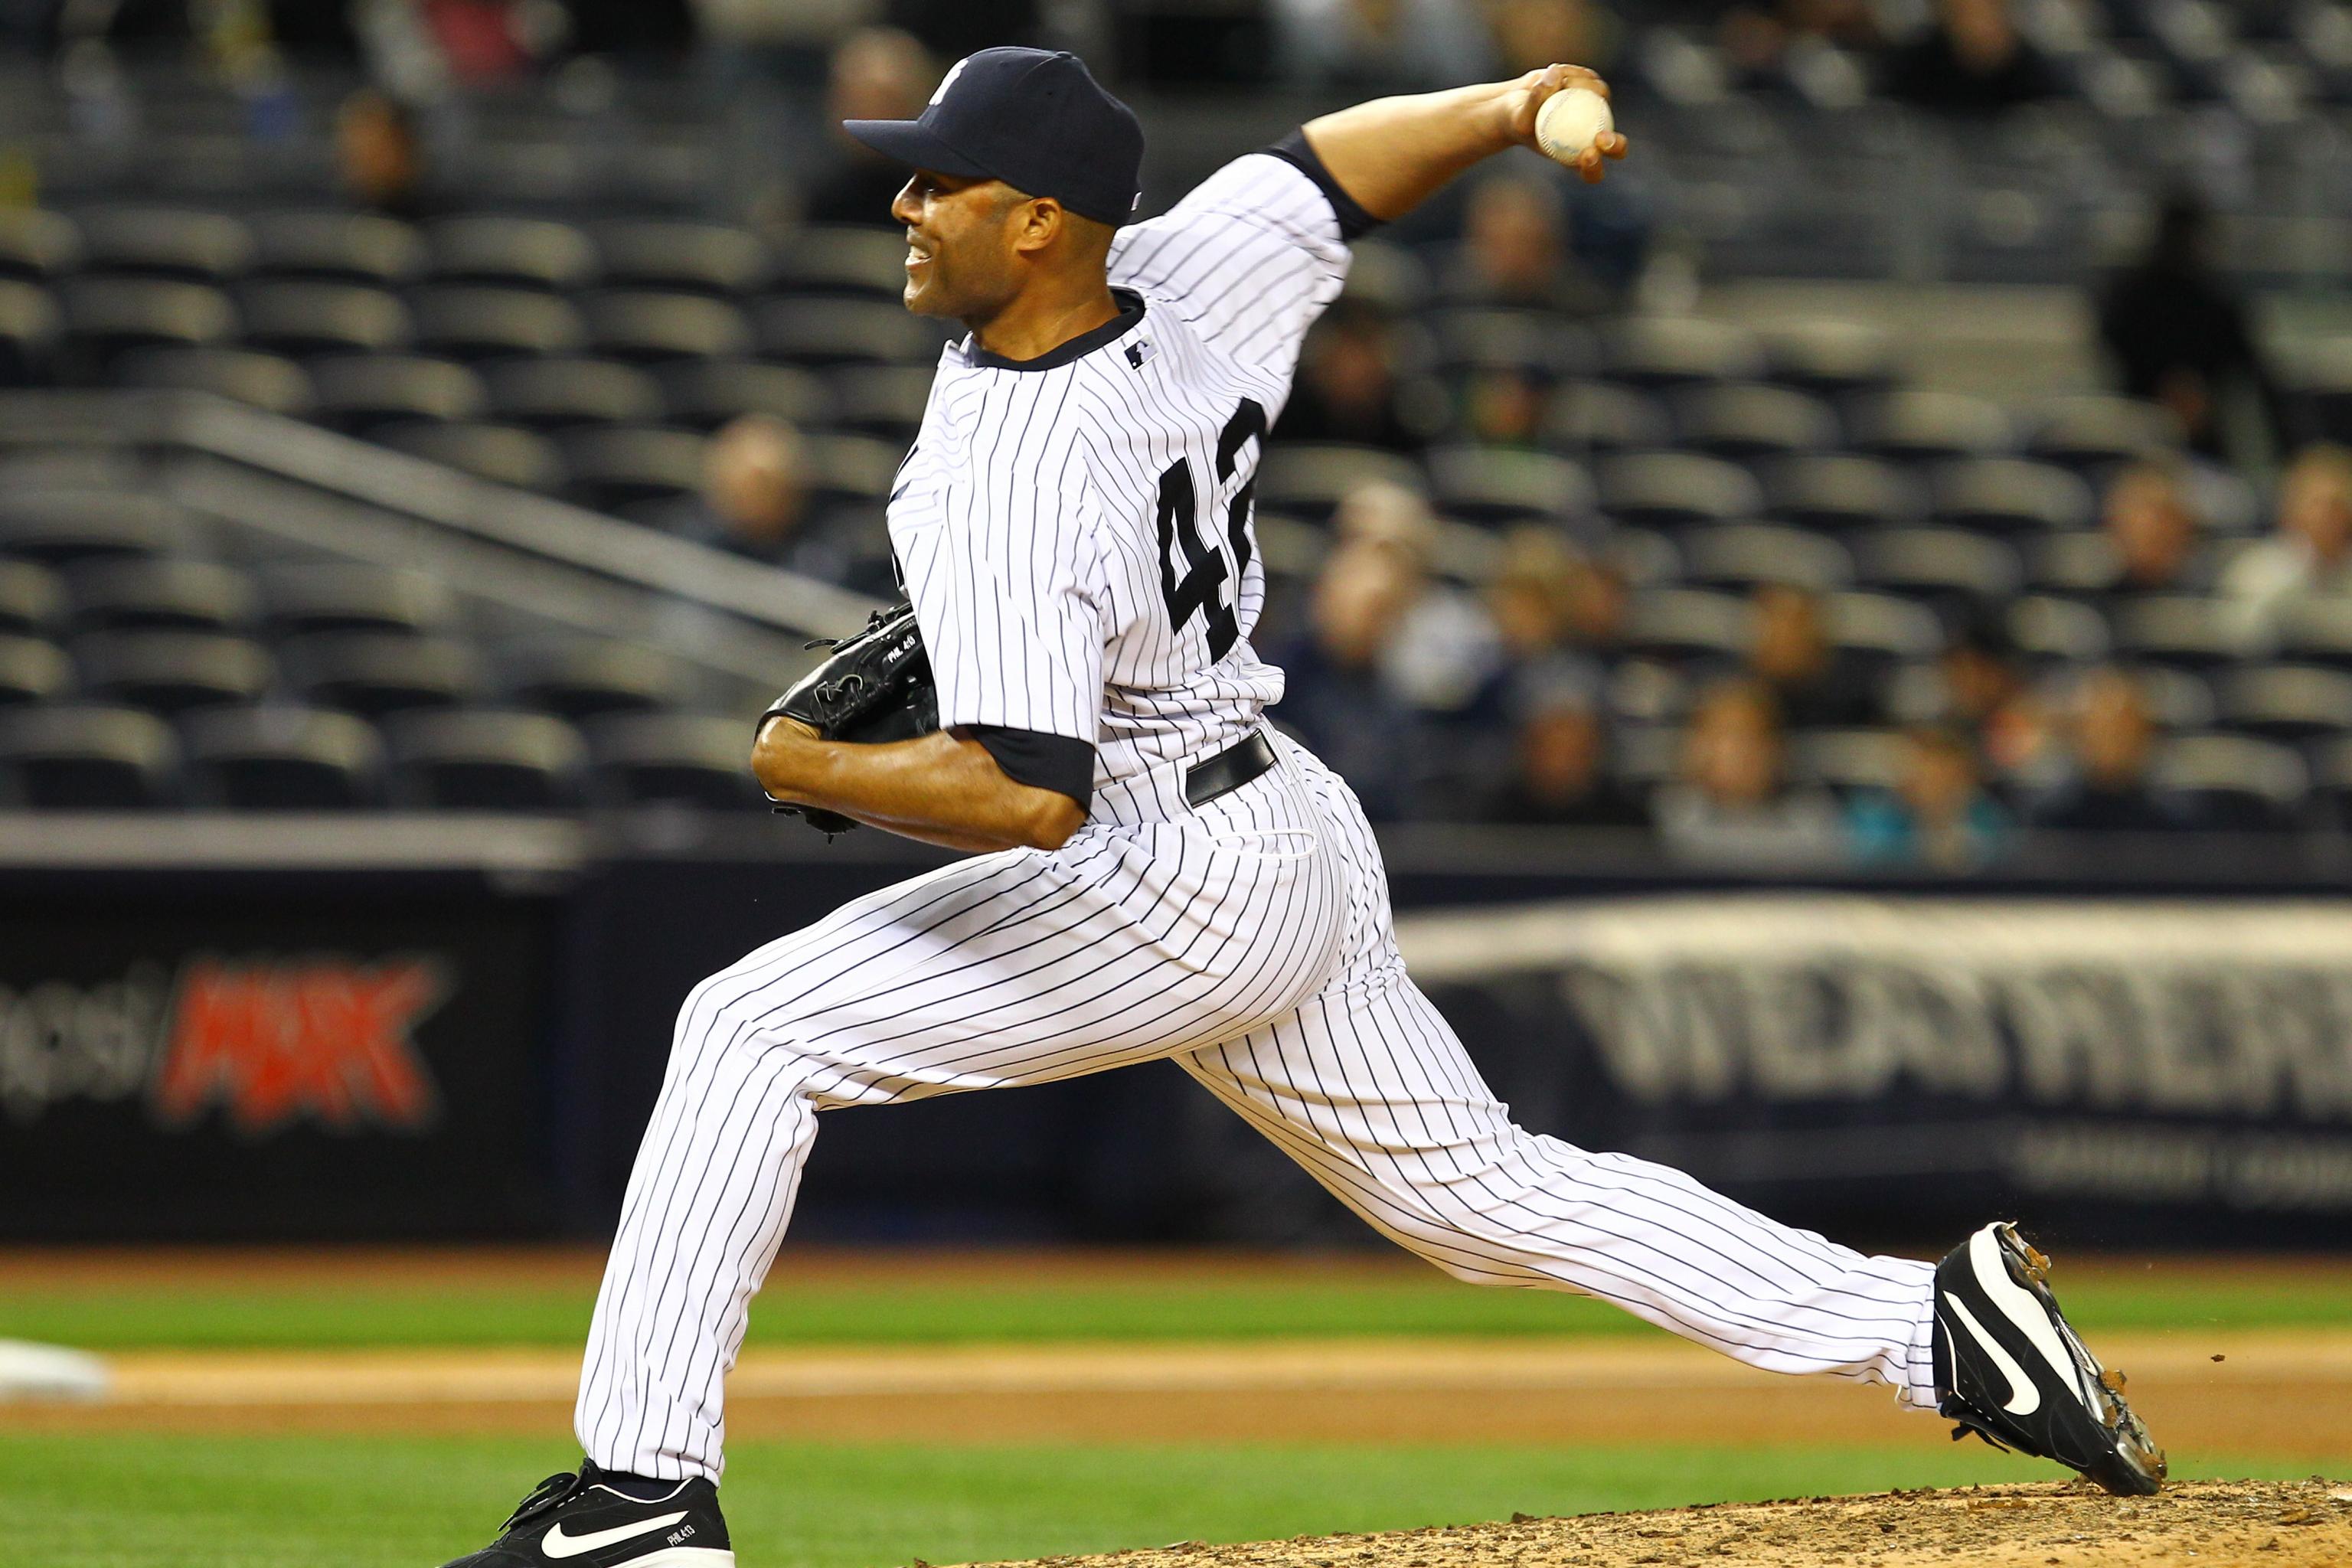 Mariano Rivera's torn ACL confirmed by Yankees team doctors 